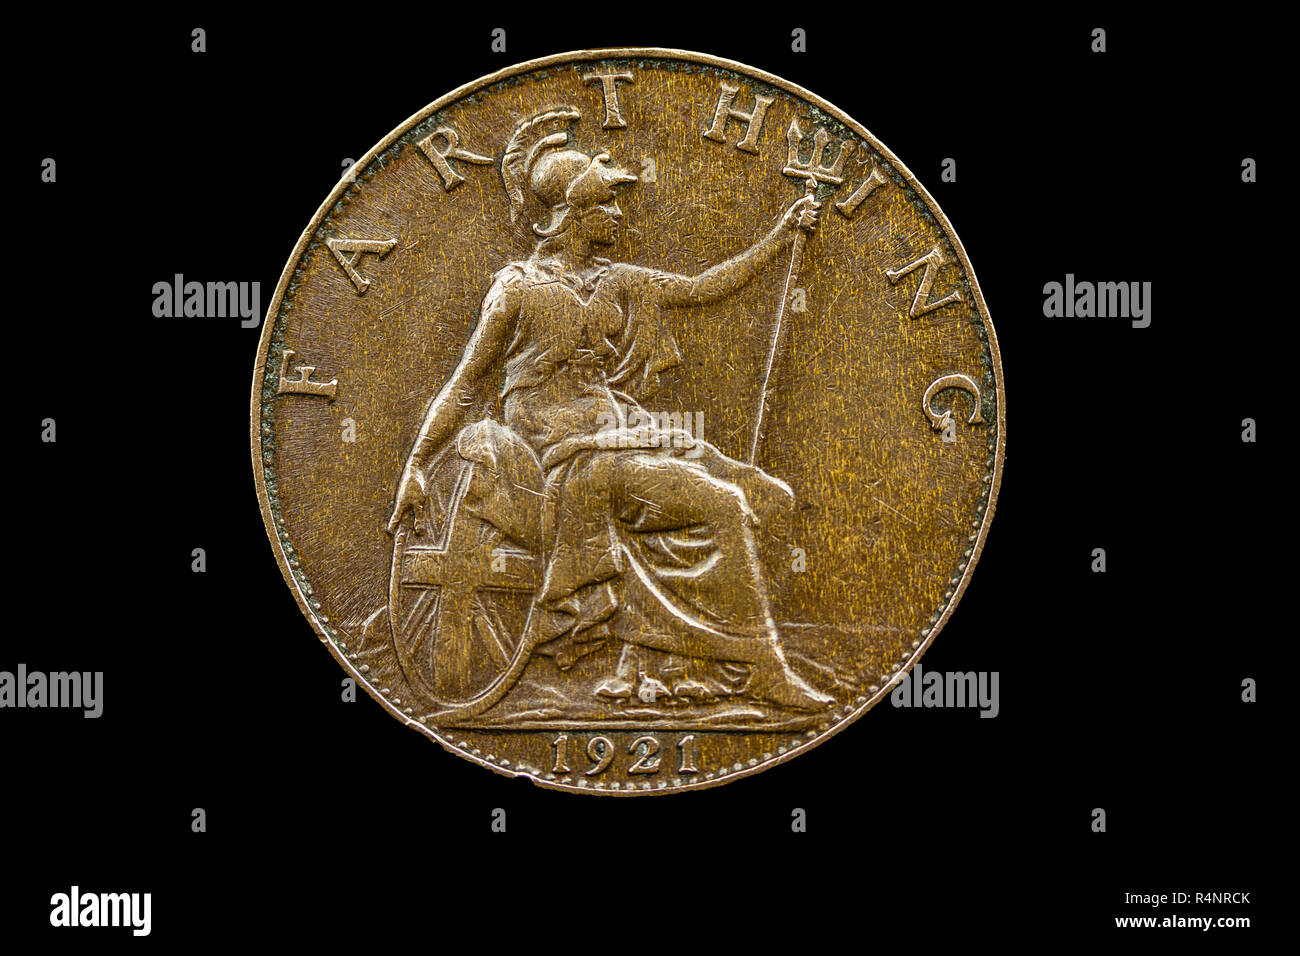 UK 1921 Farthing coin, showing reverse side of Britannia seated, wearing a helmet, holding a trident, hand resting on a shield, with the date 1921 Stock Photo